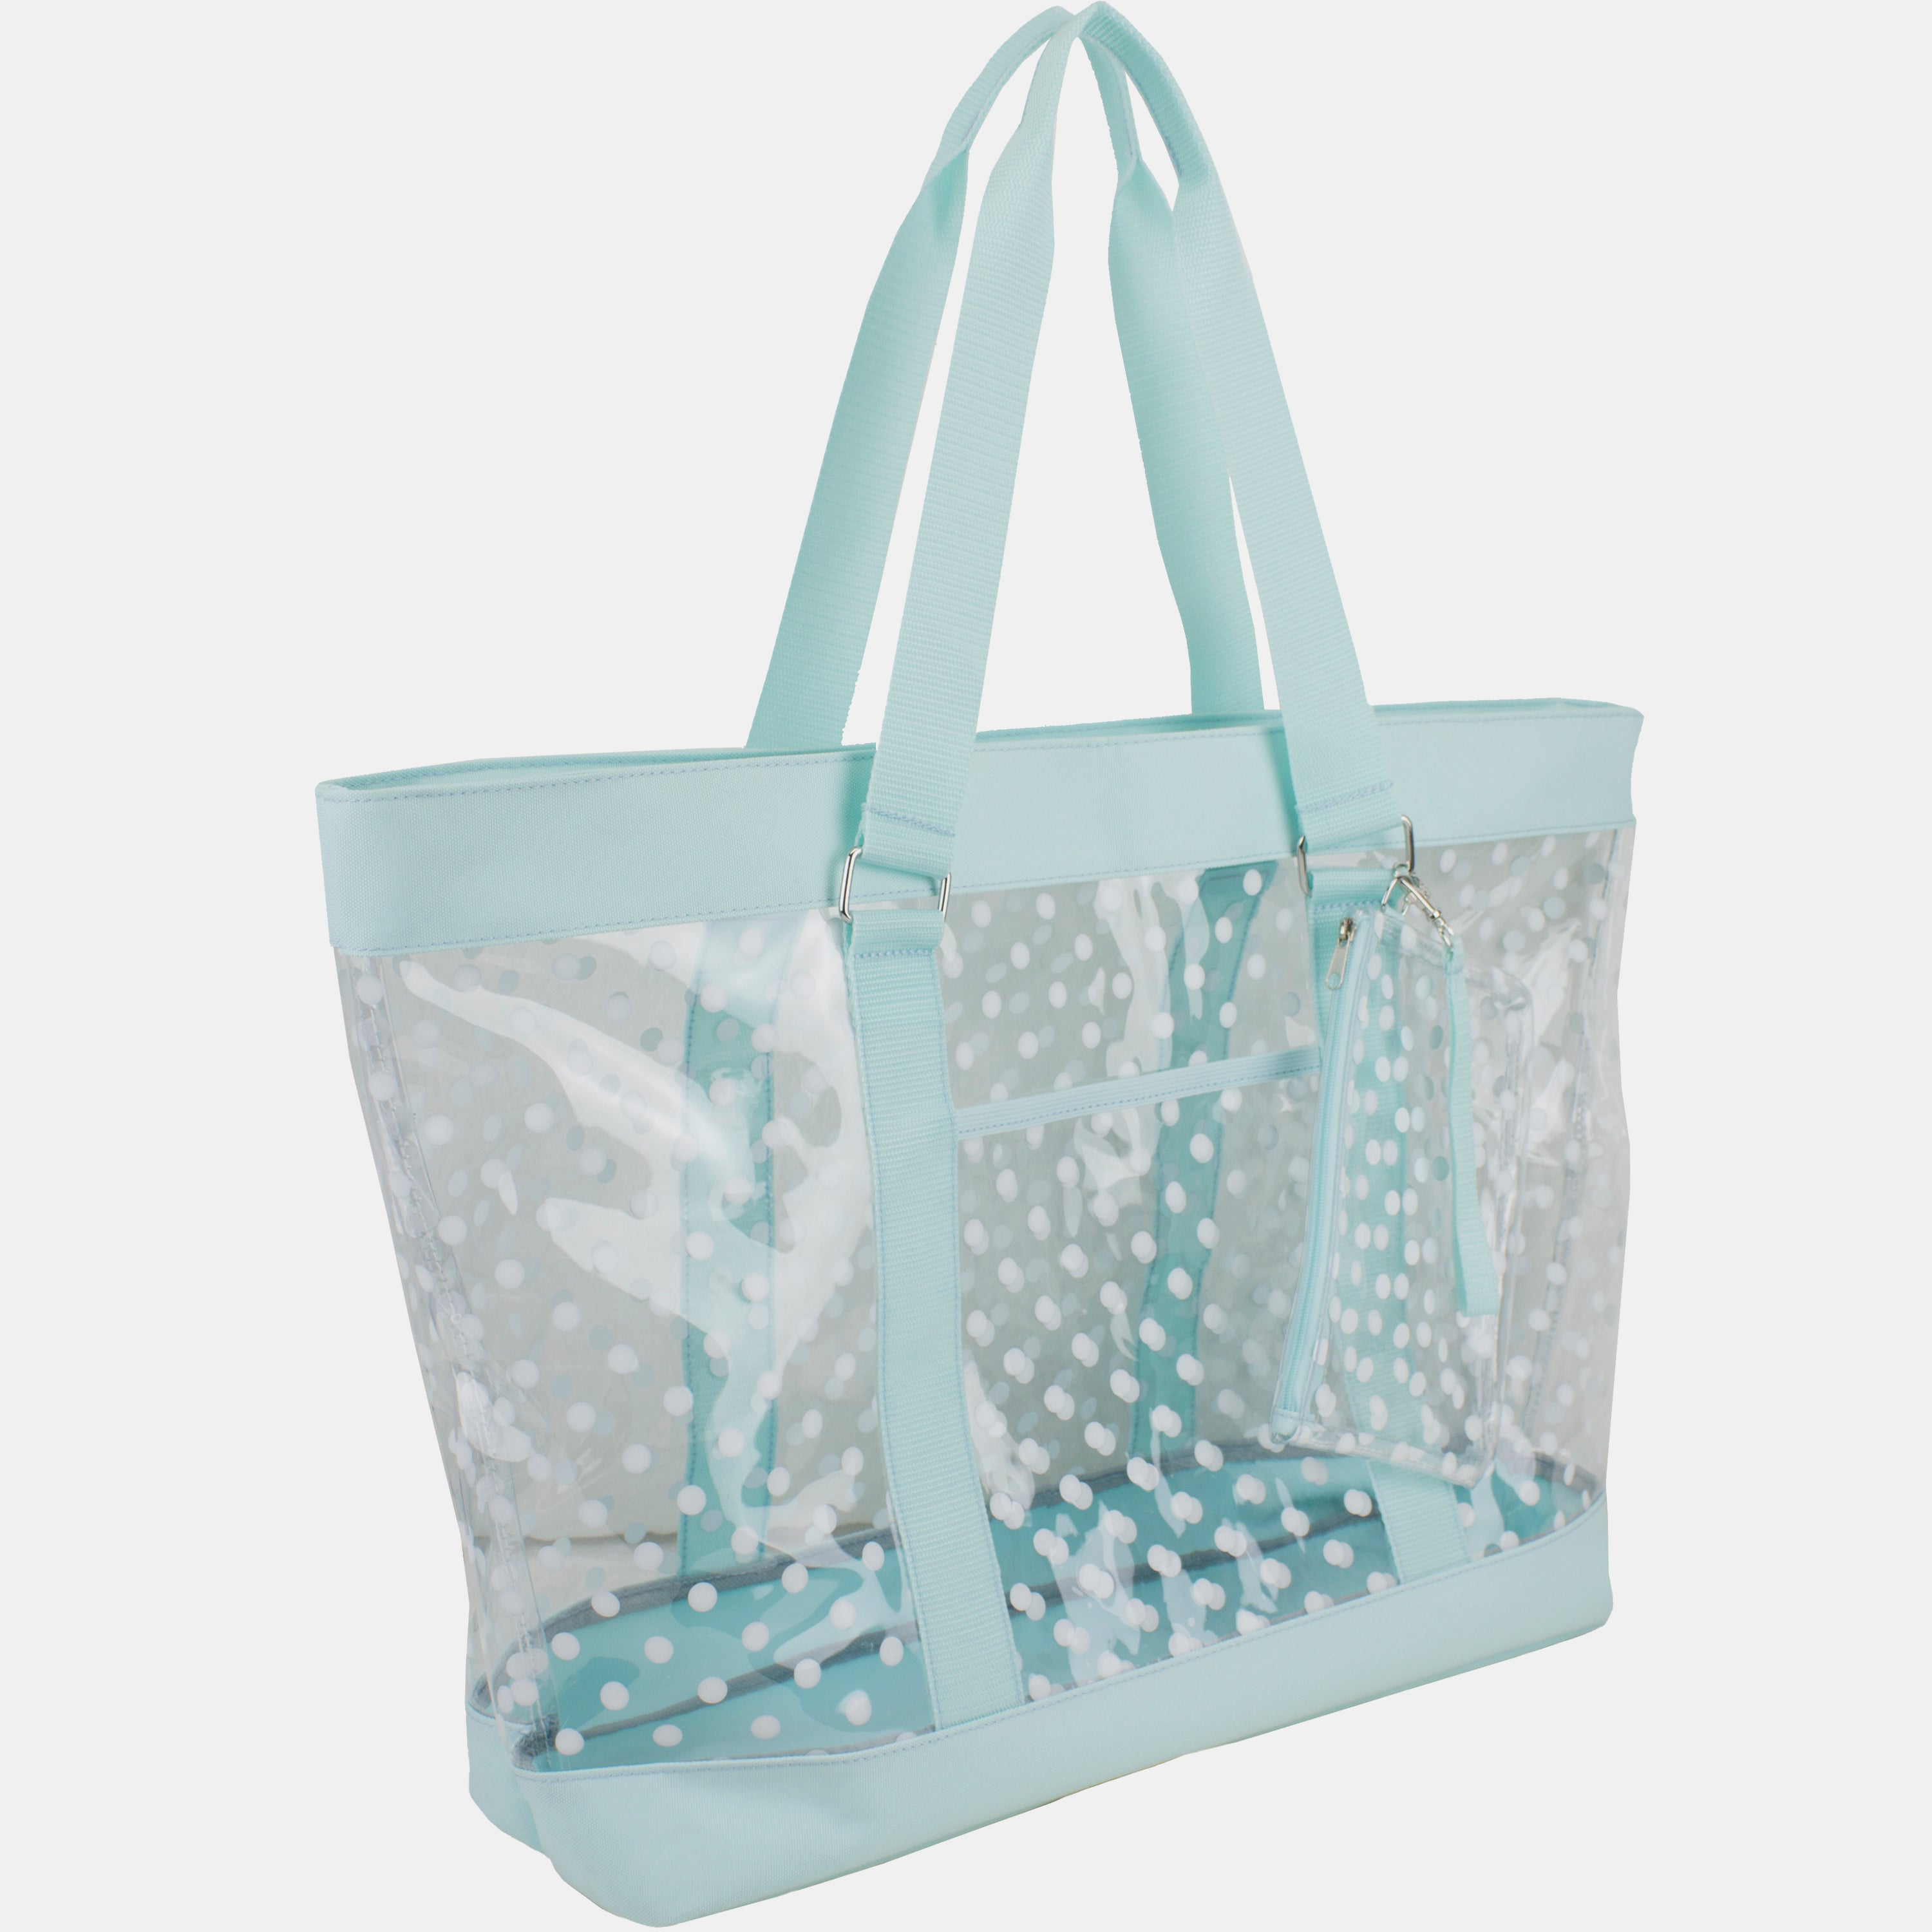 Eastsport Supreme Deluxe 100% Clear PVC Printed Large Beach Tote with